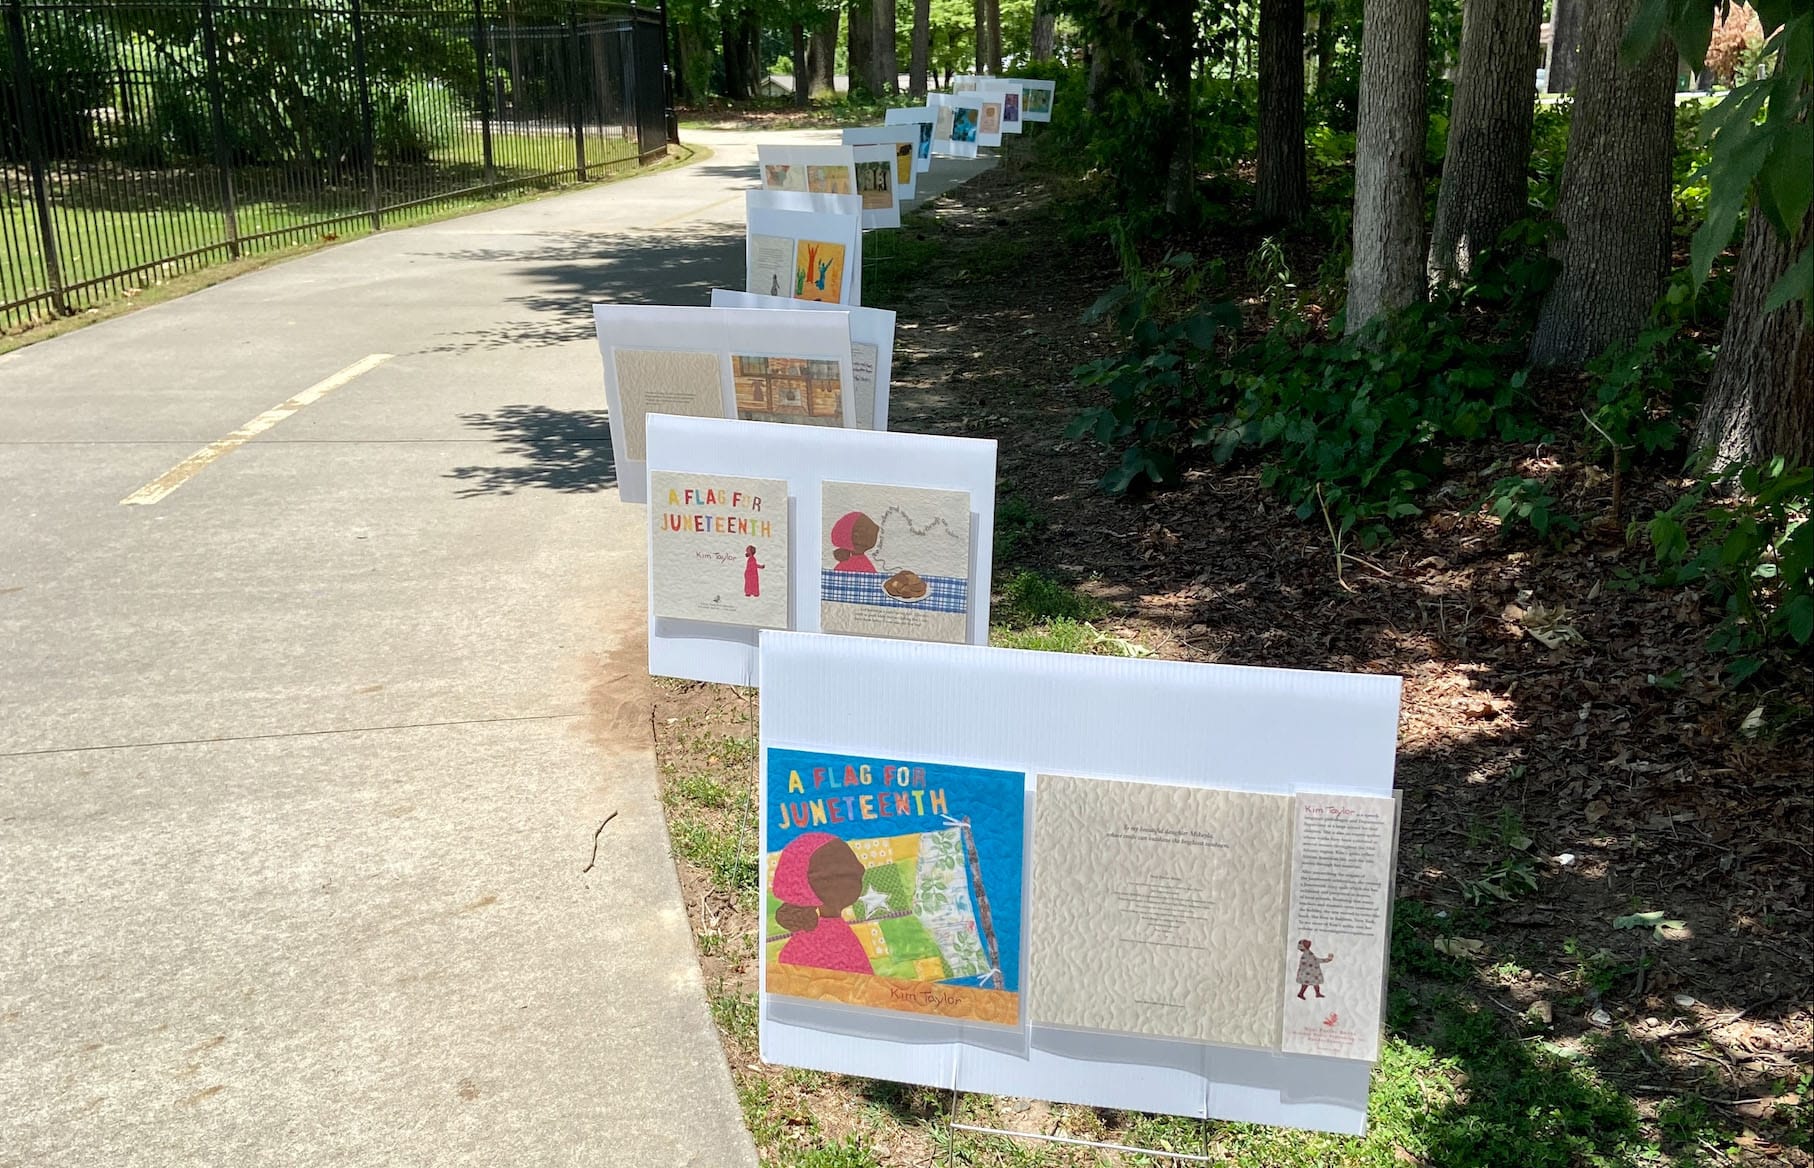 Dunwoody celebrates Juneteenth with a StoryWalk